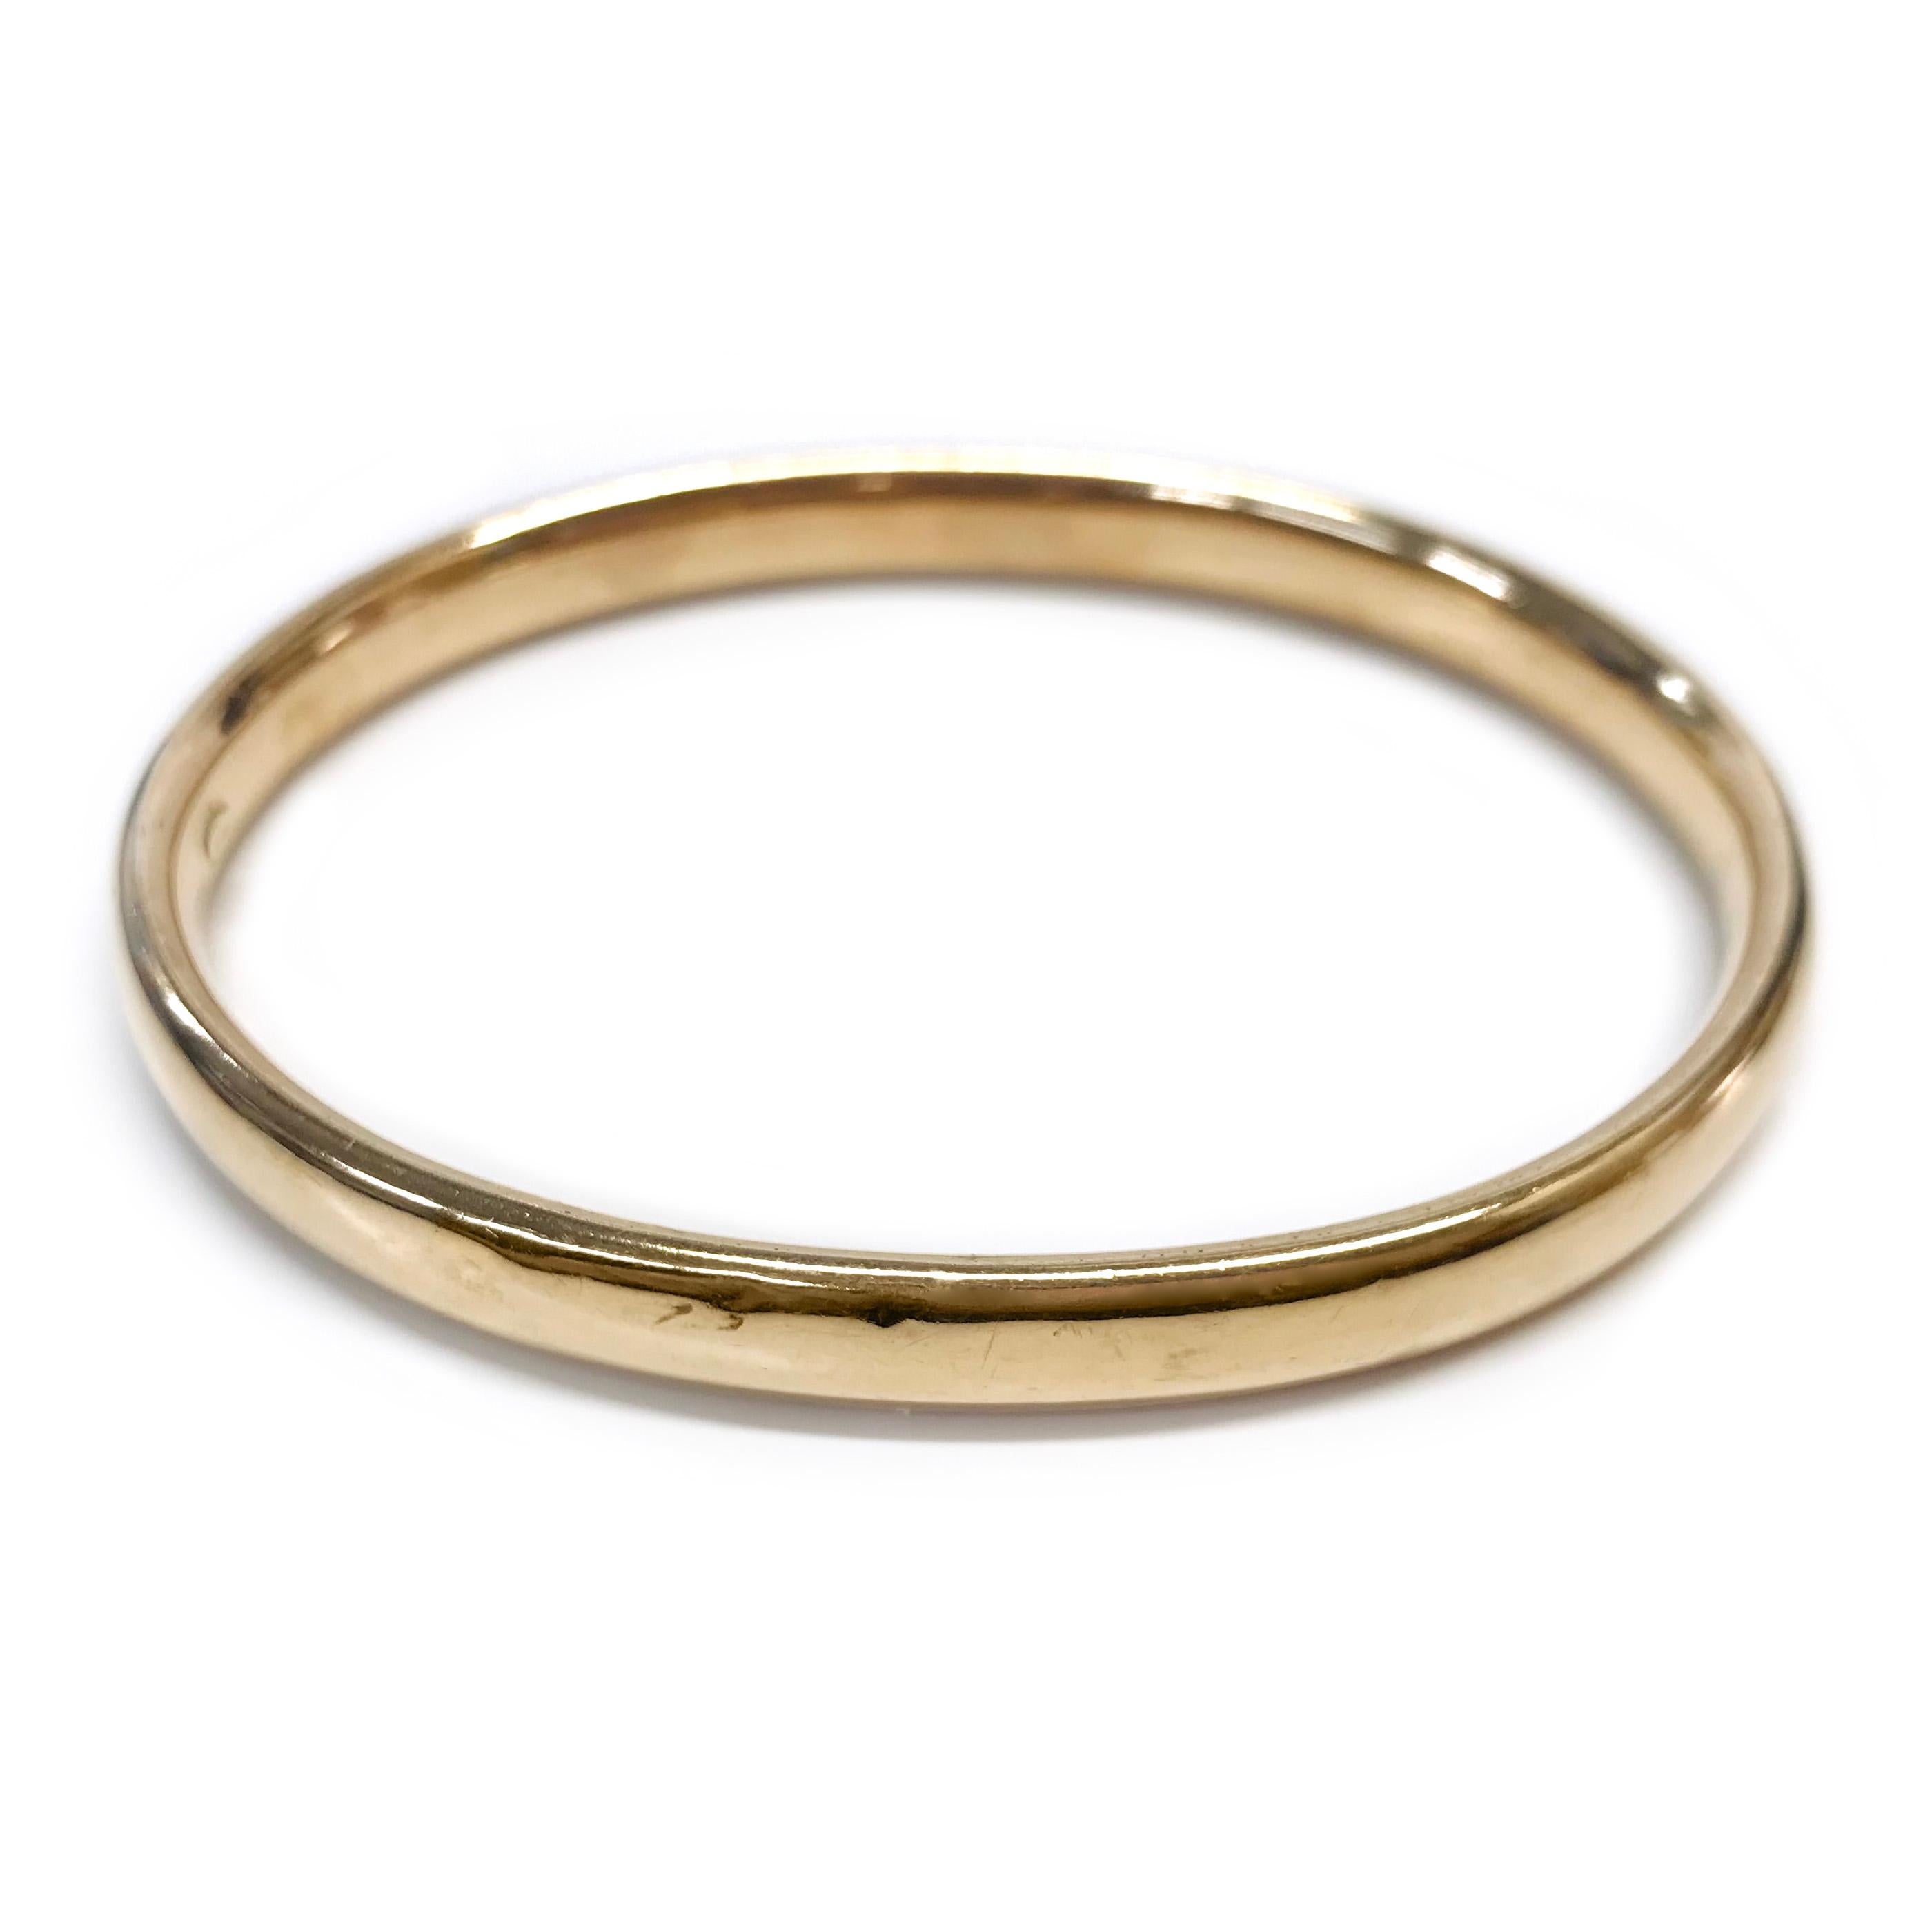 14 Karat Rose Gold Bangle Bracelet. The bangle has an all-around smooth shiny finish. There are approximately ten small dents on the outer surface of the bangle. The bangle measures 7.0mm wide x 4.0mm deep. There is a raised circular maker's mark on